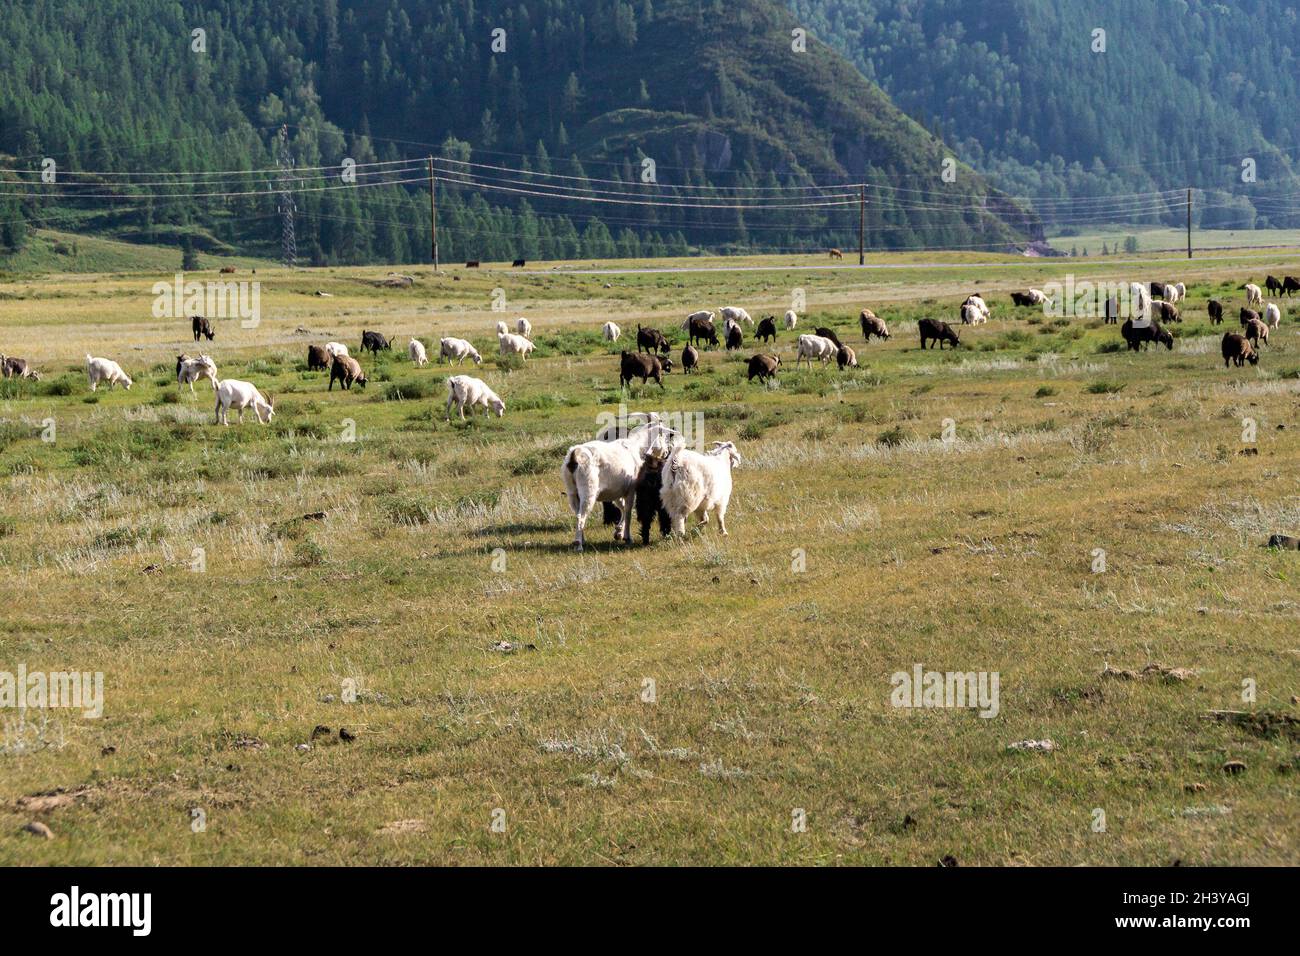 A large flock of sheep grazes in a valley with vegetation scorched by the bright sun. Power lines in mountainous areas. Stock Photo